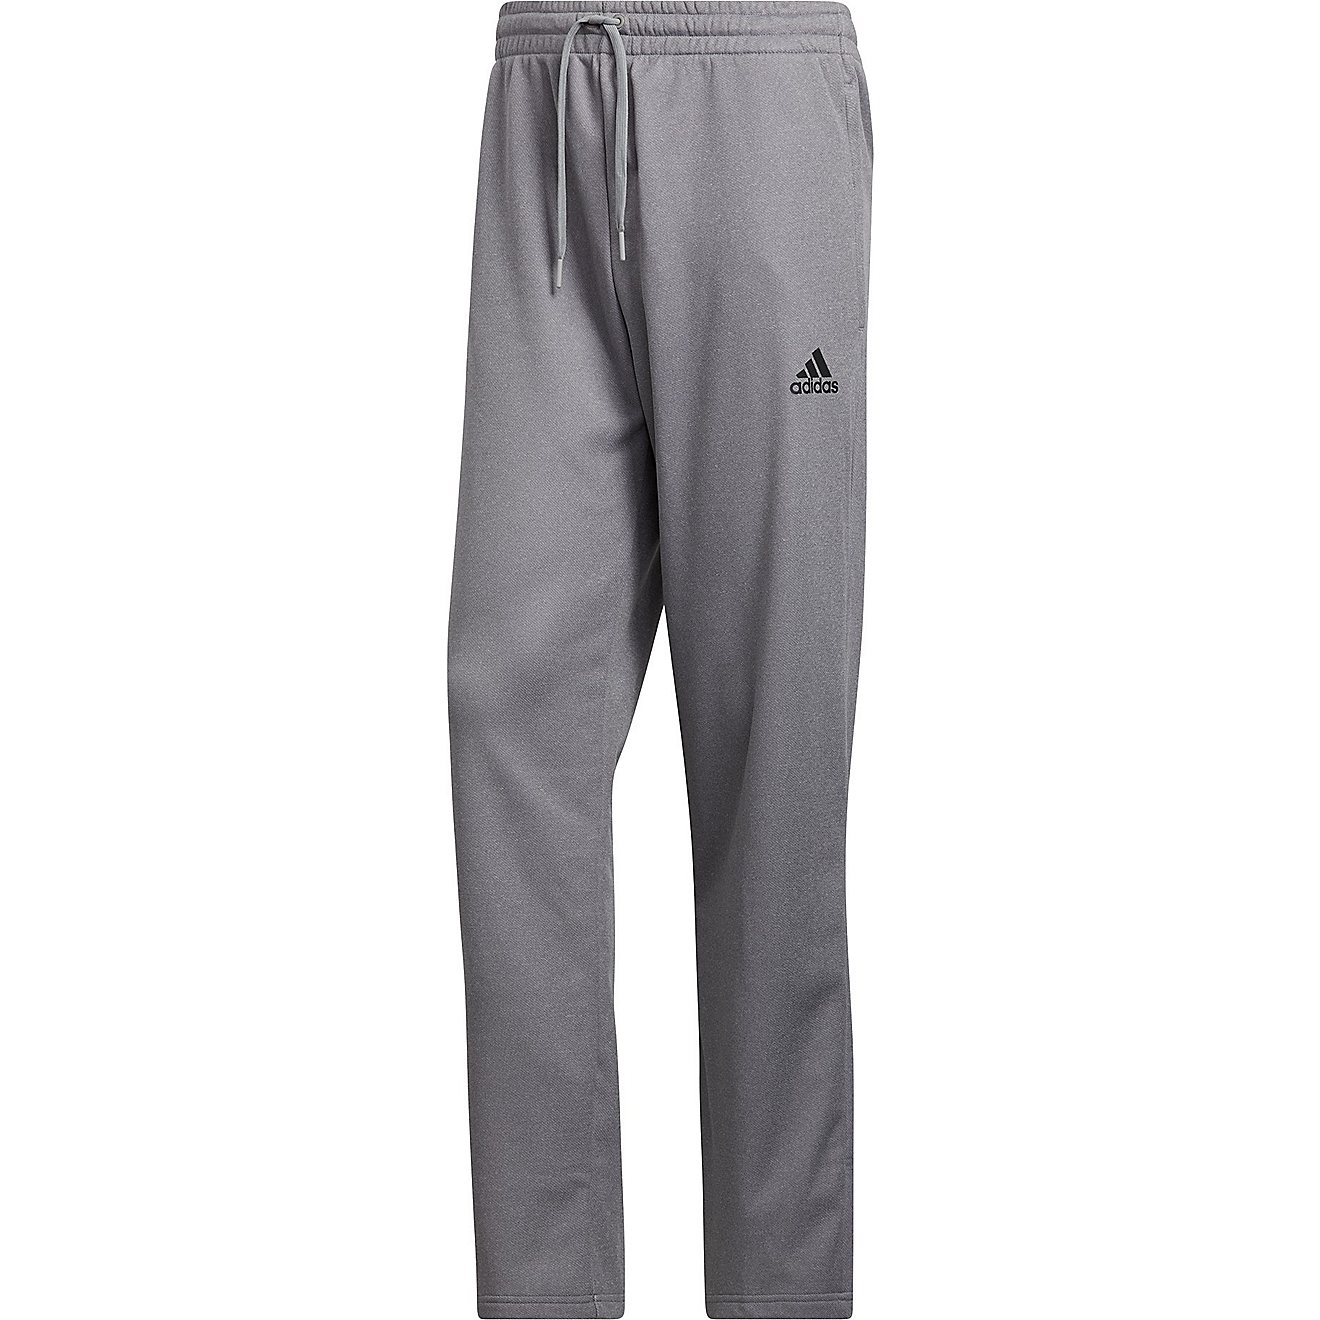 adidas Men's Team Issue Open Sweatpants                                                                                          - view number 8